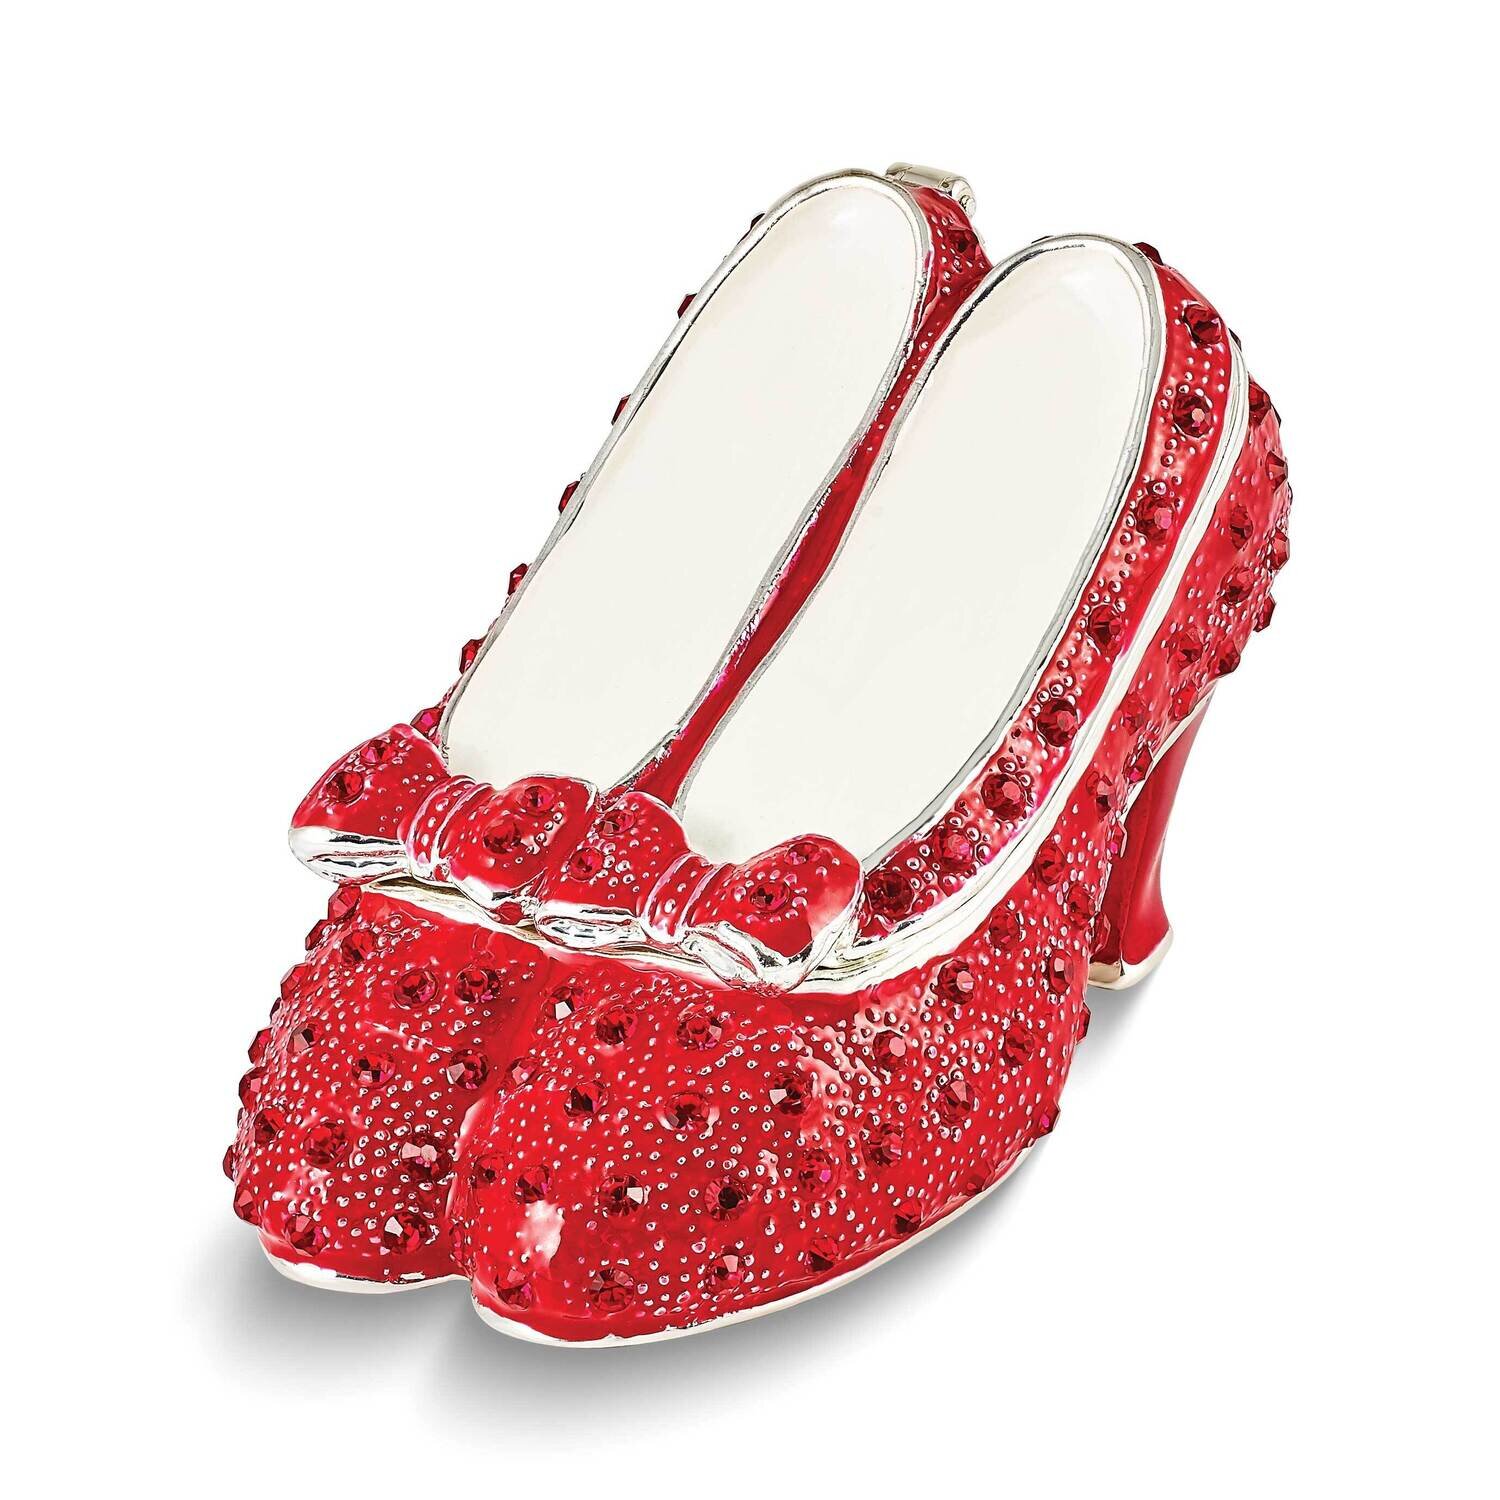 By Jere SCARLET Red High Heels with Bows Trinket Box with Matching 18 Inch Necklace Pewter Bejeweled Crystals Silver-tone Enameled BJ4176